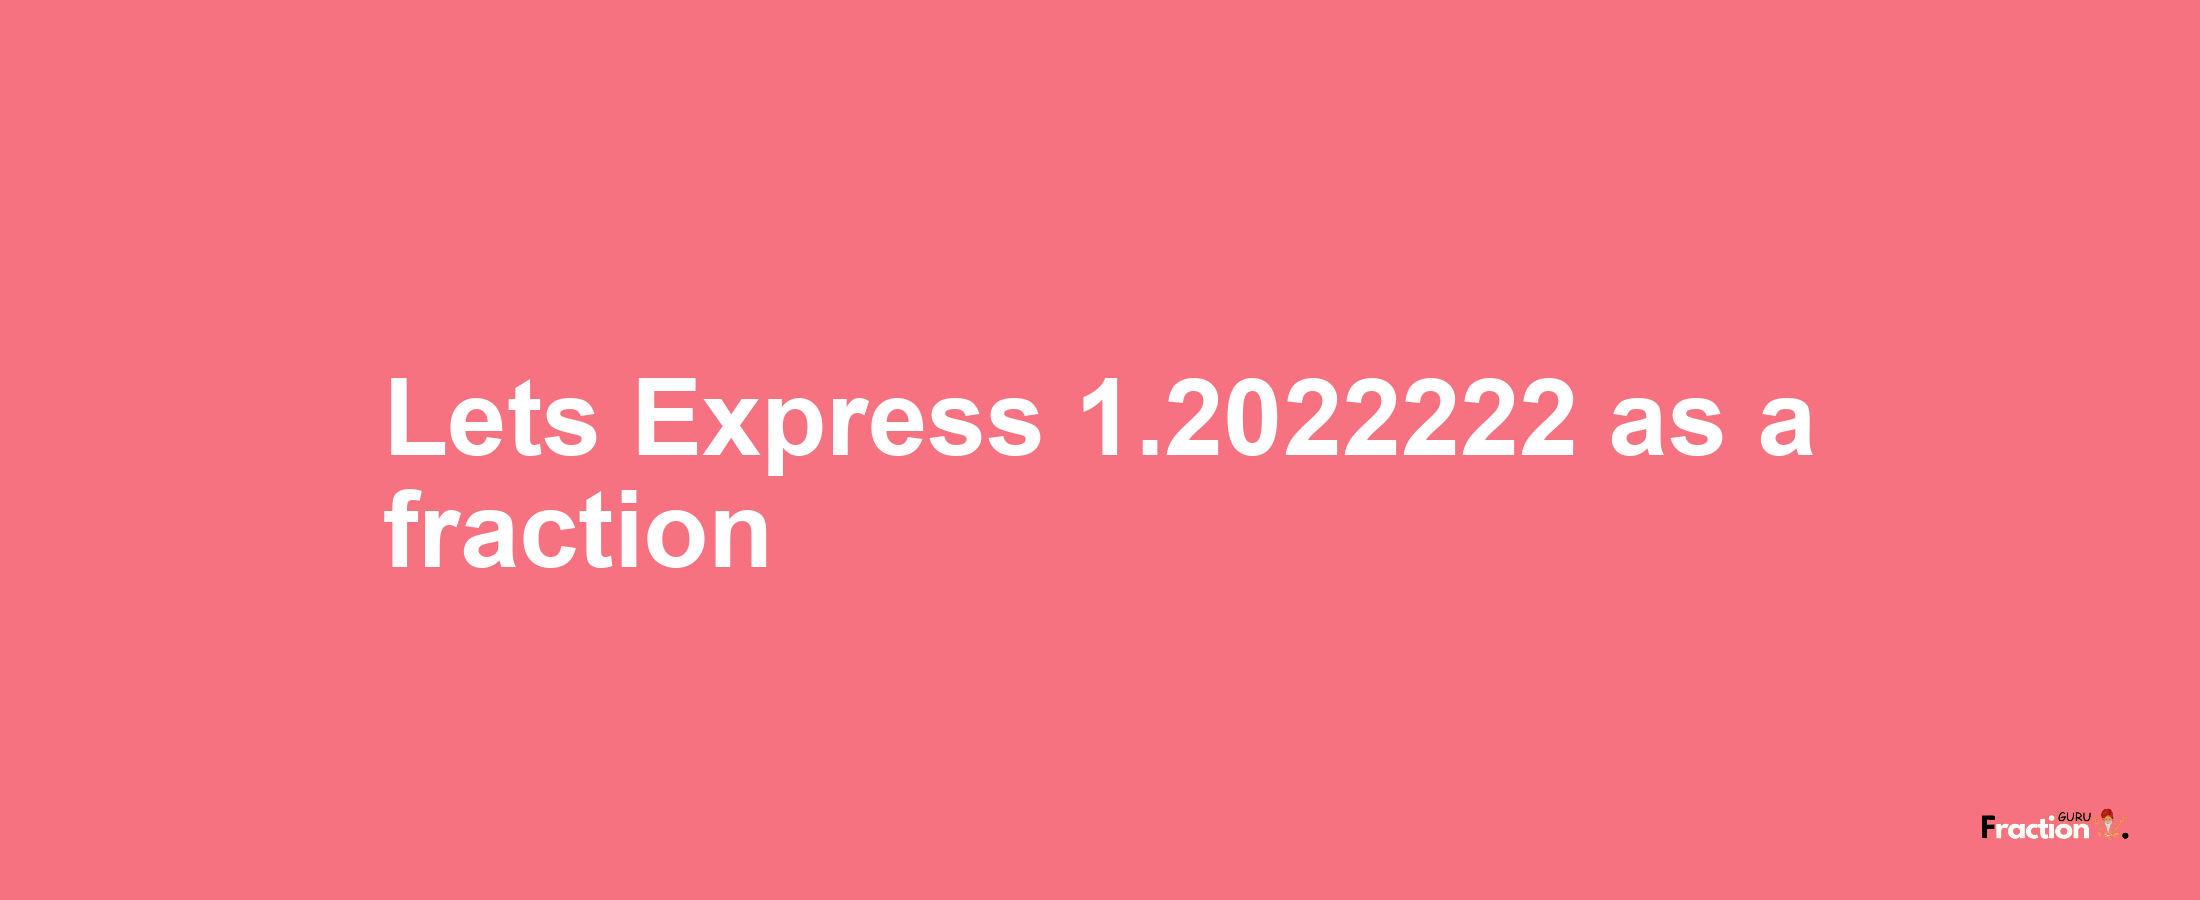 Lets Express 1.2022222 as afraction